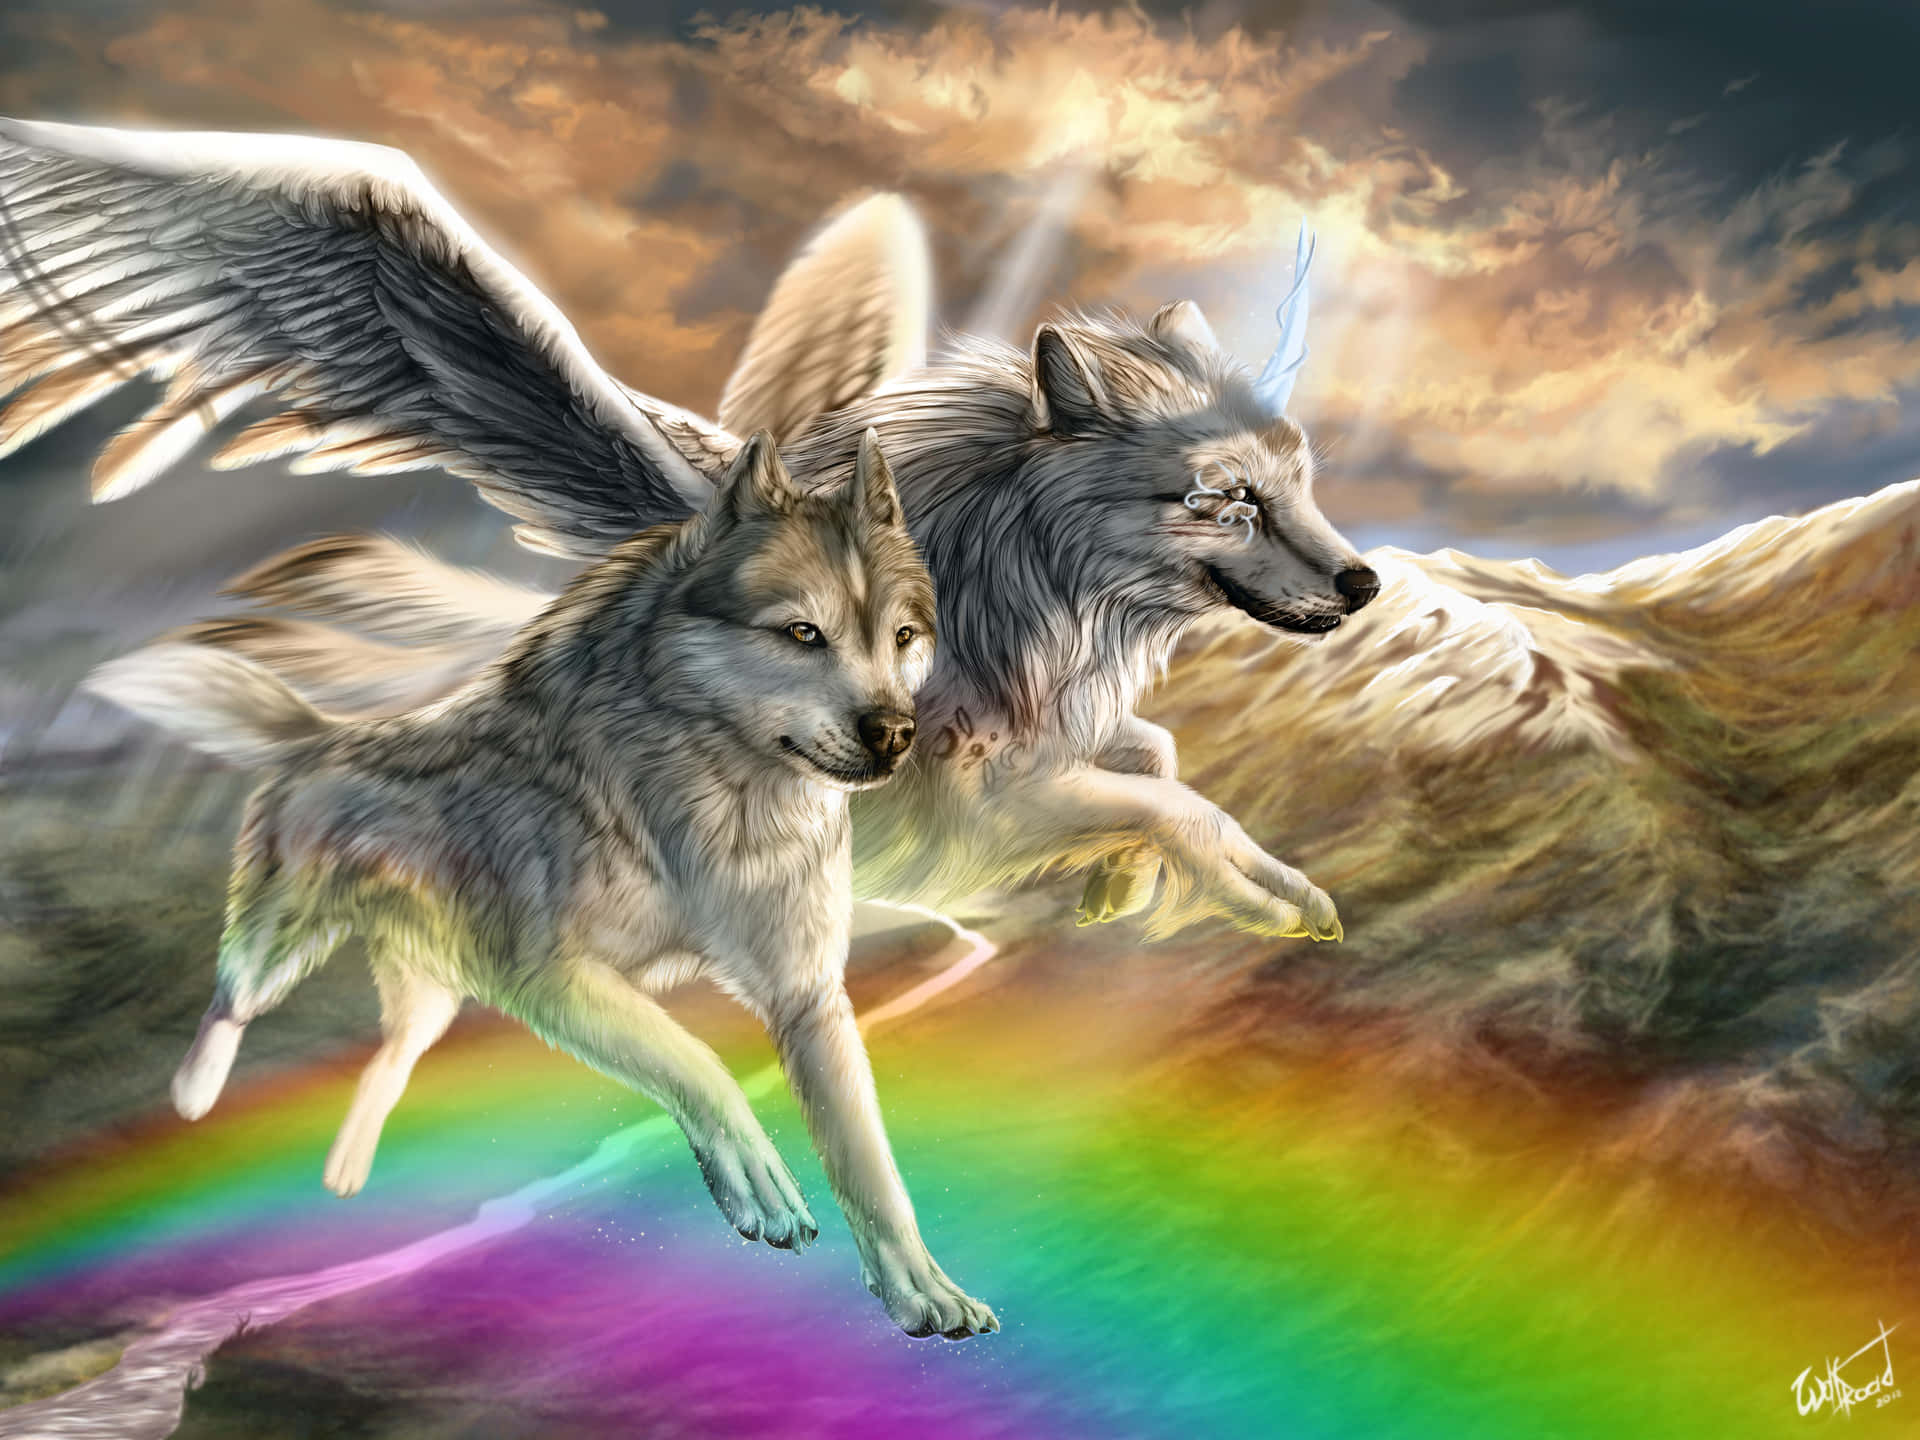 cute anime wolves with wings